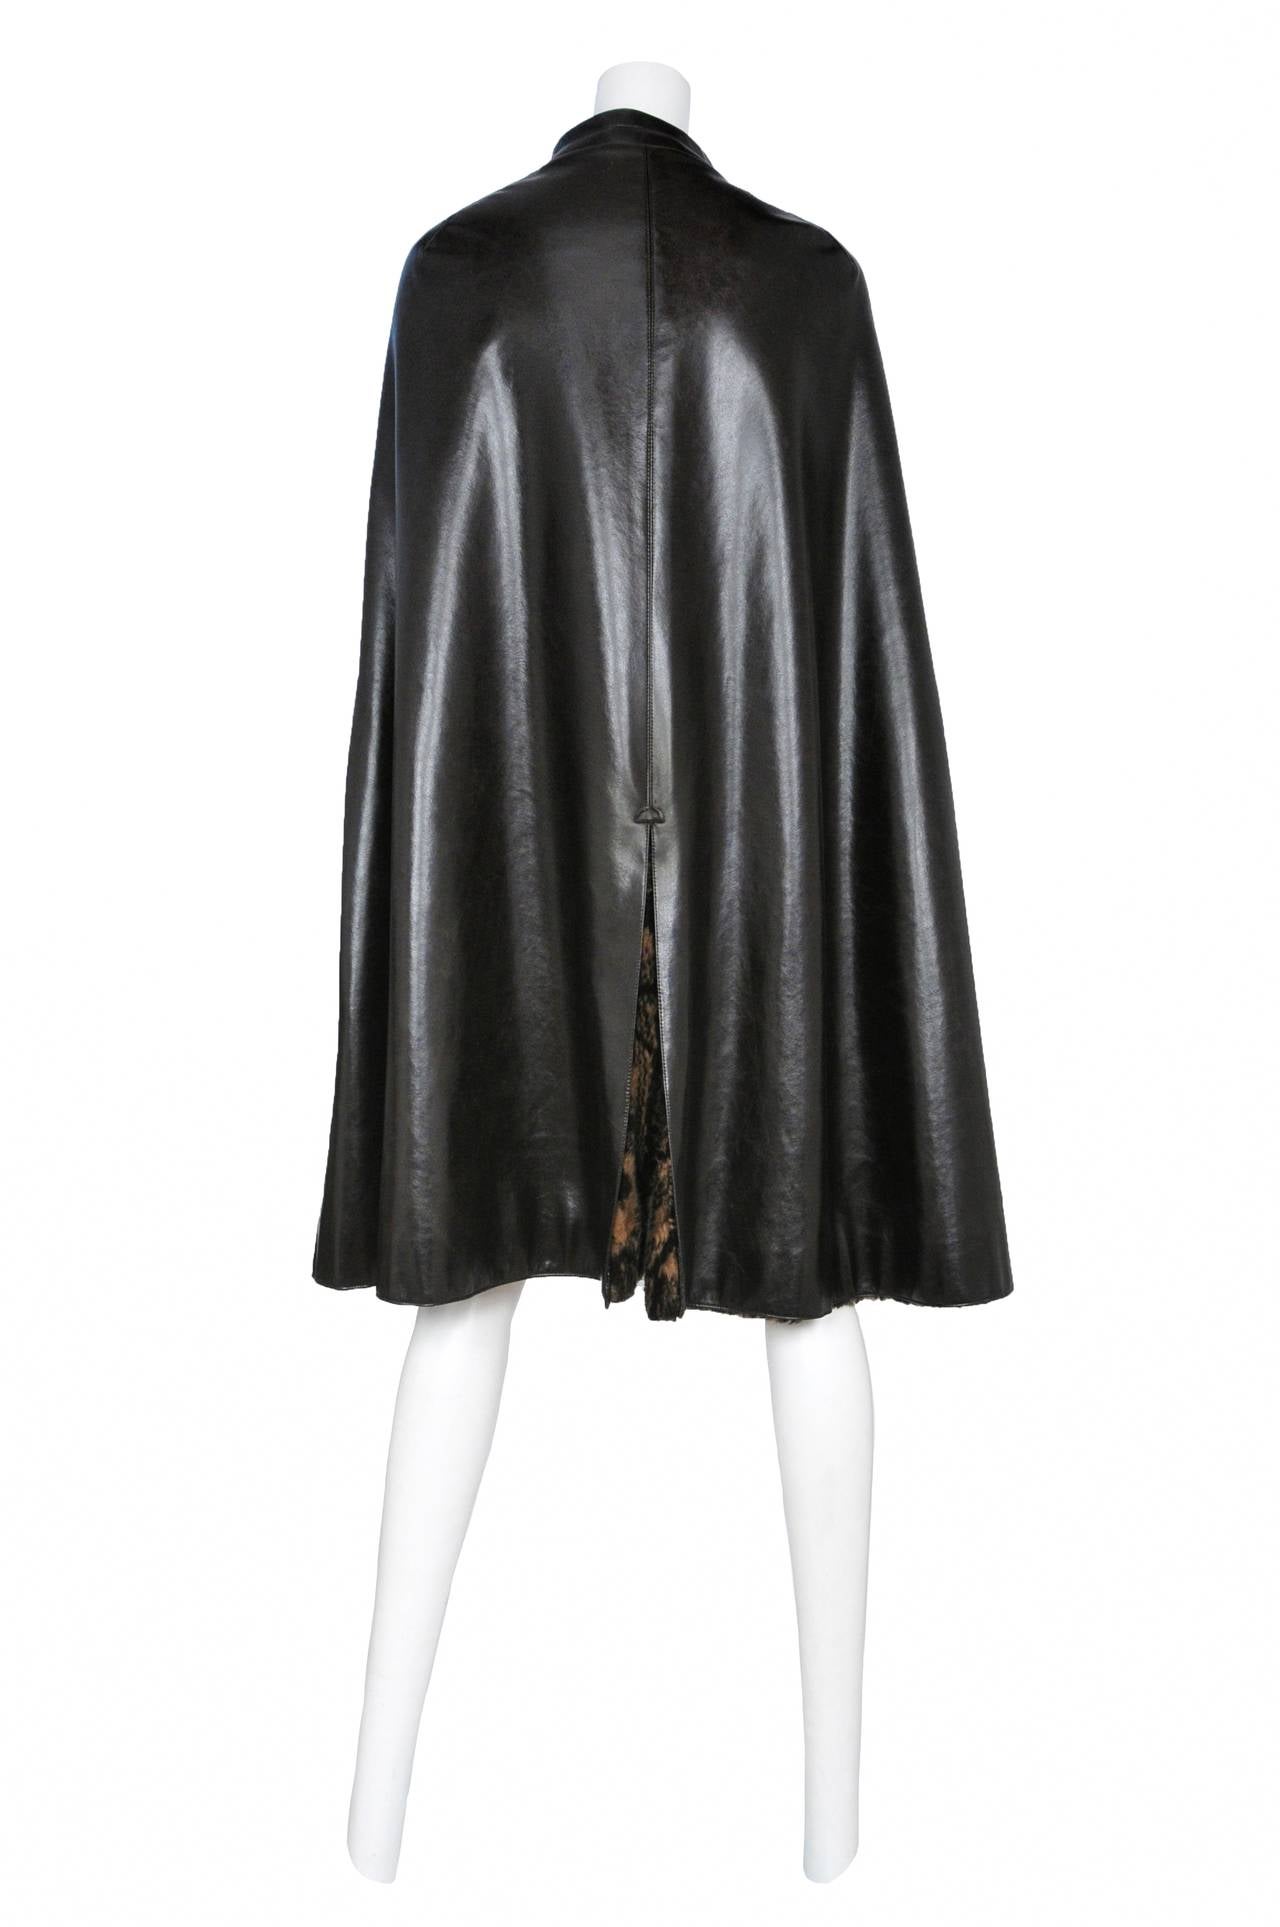 Vintage Pierre Cardin dark brown vinyl zip front cape with two circle patch pockets featuring horizontal stitching and faux fur lining.